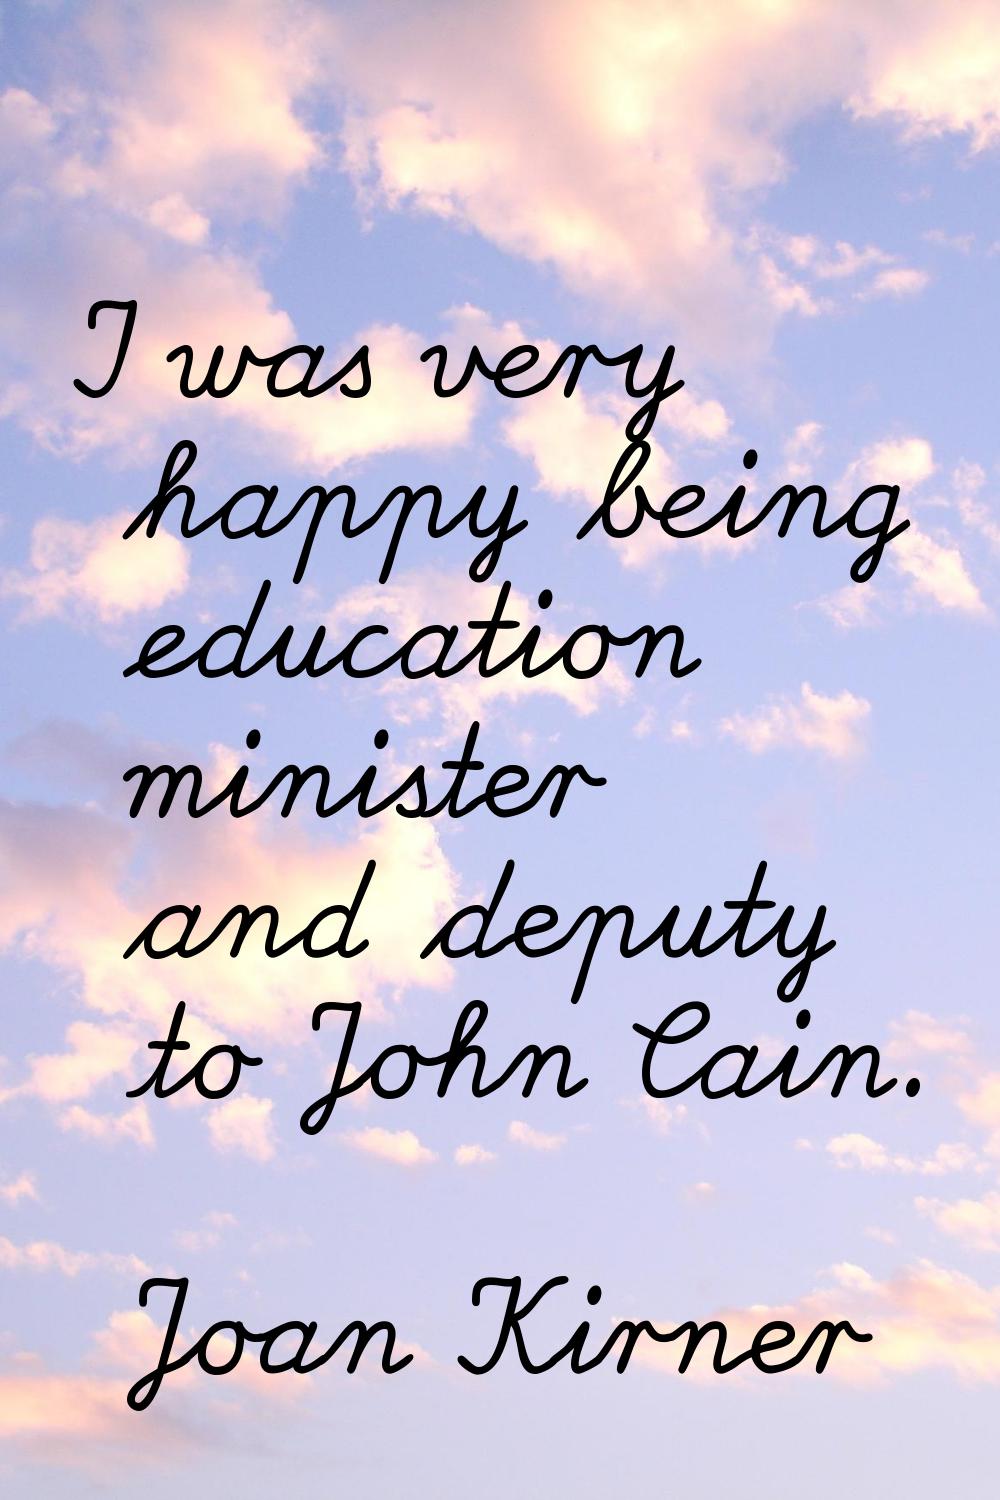 I was very happy being education minister and deputy to John Cain.